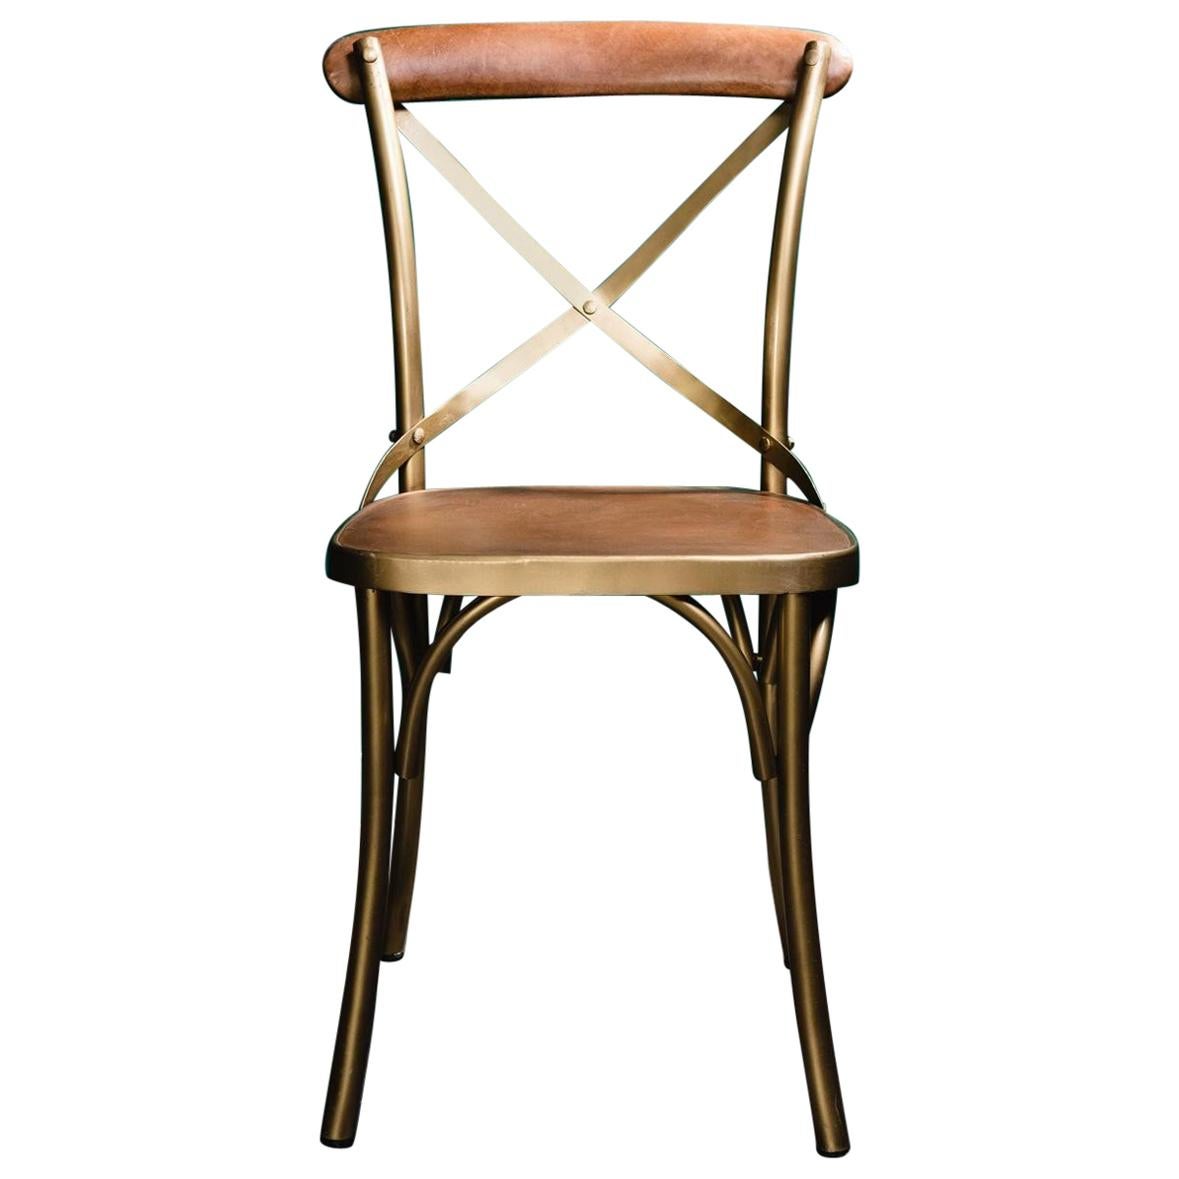 French Design Metal and Cognac Leather Bistro Style Chair